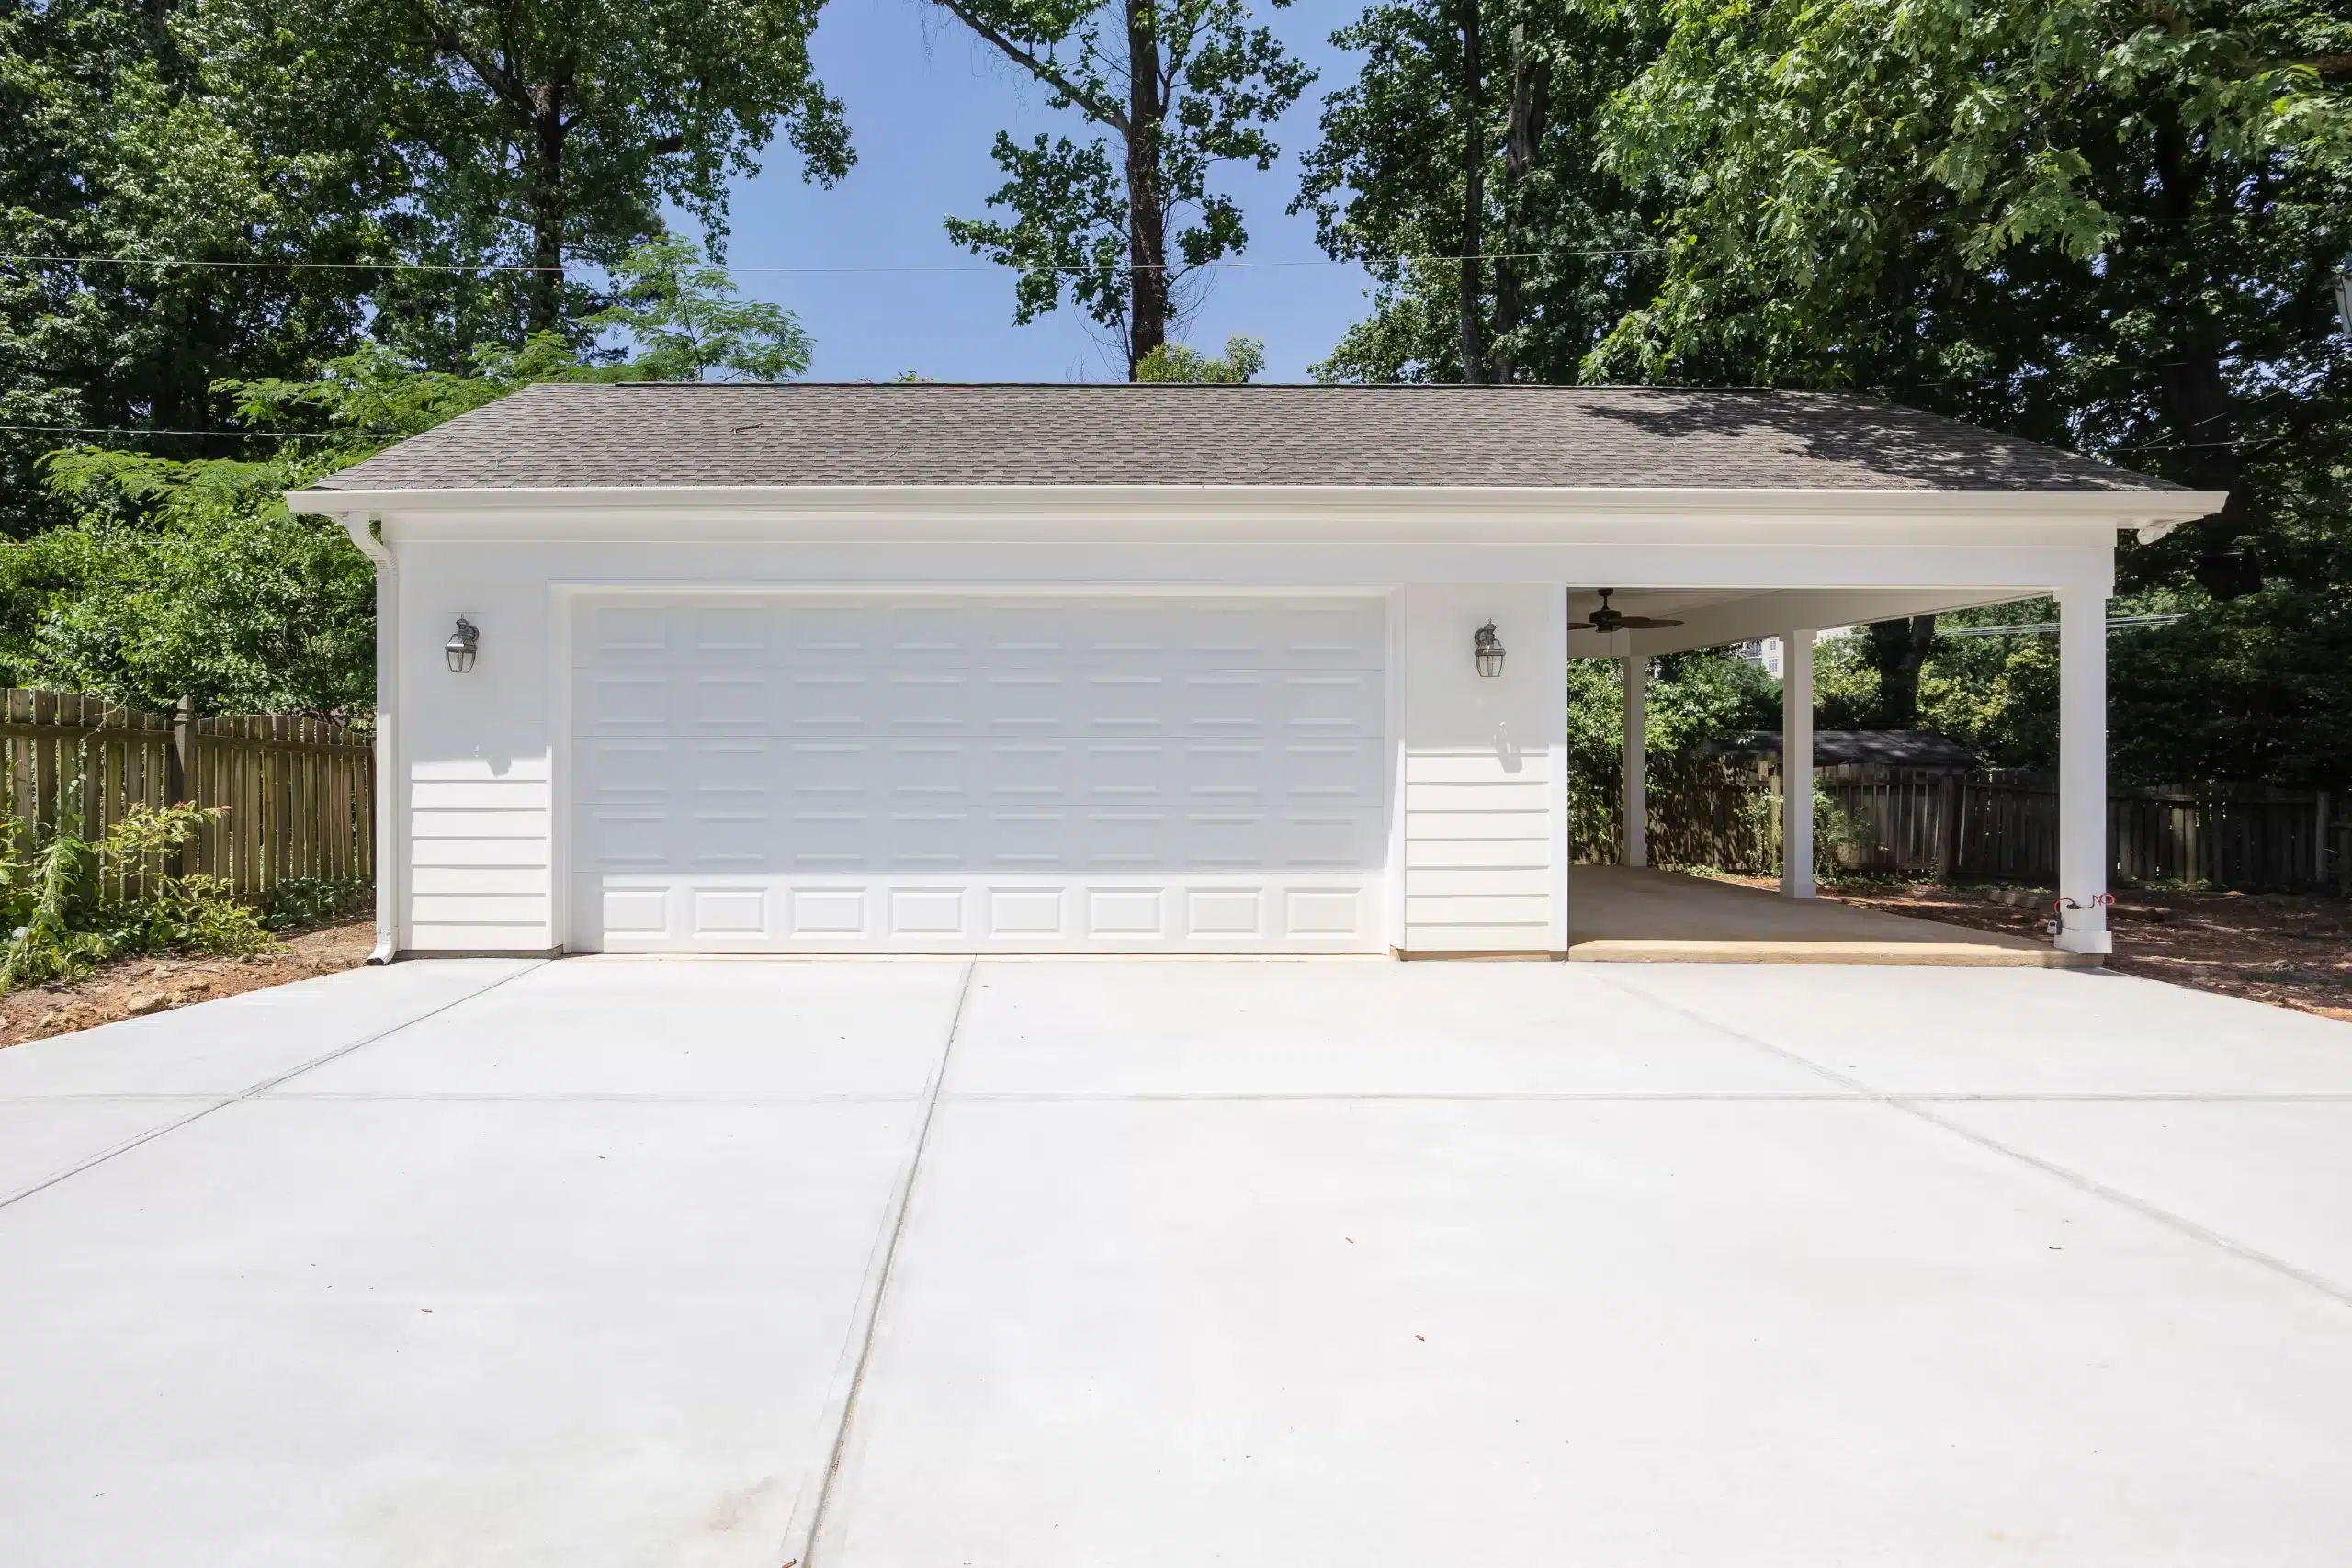 view of garage addition with white exterior with a covered working area to the side